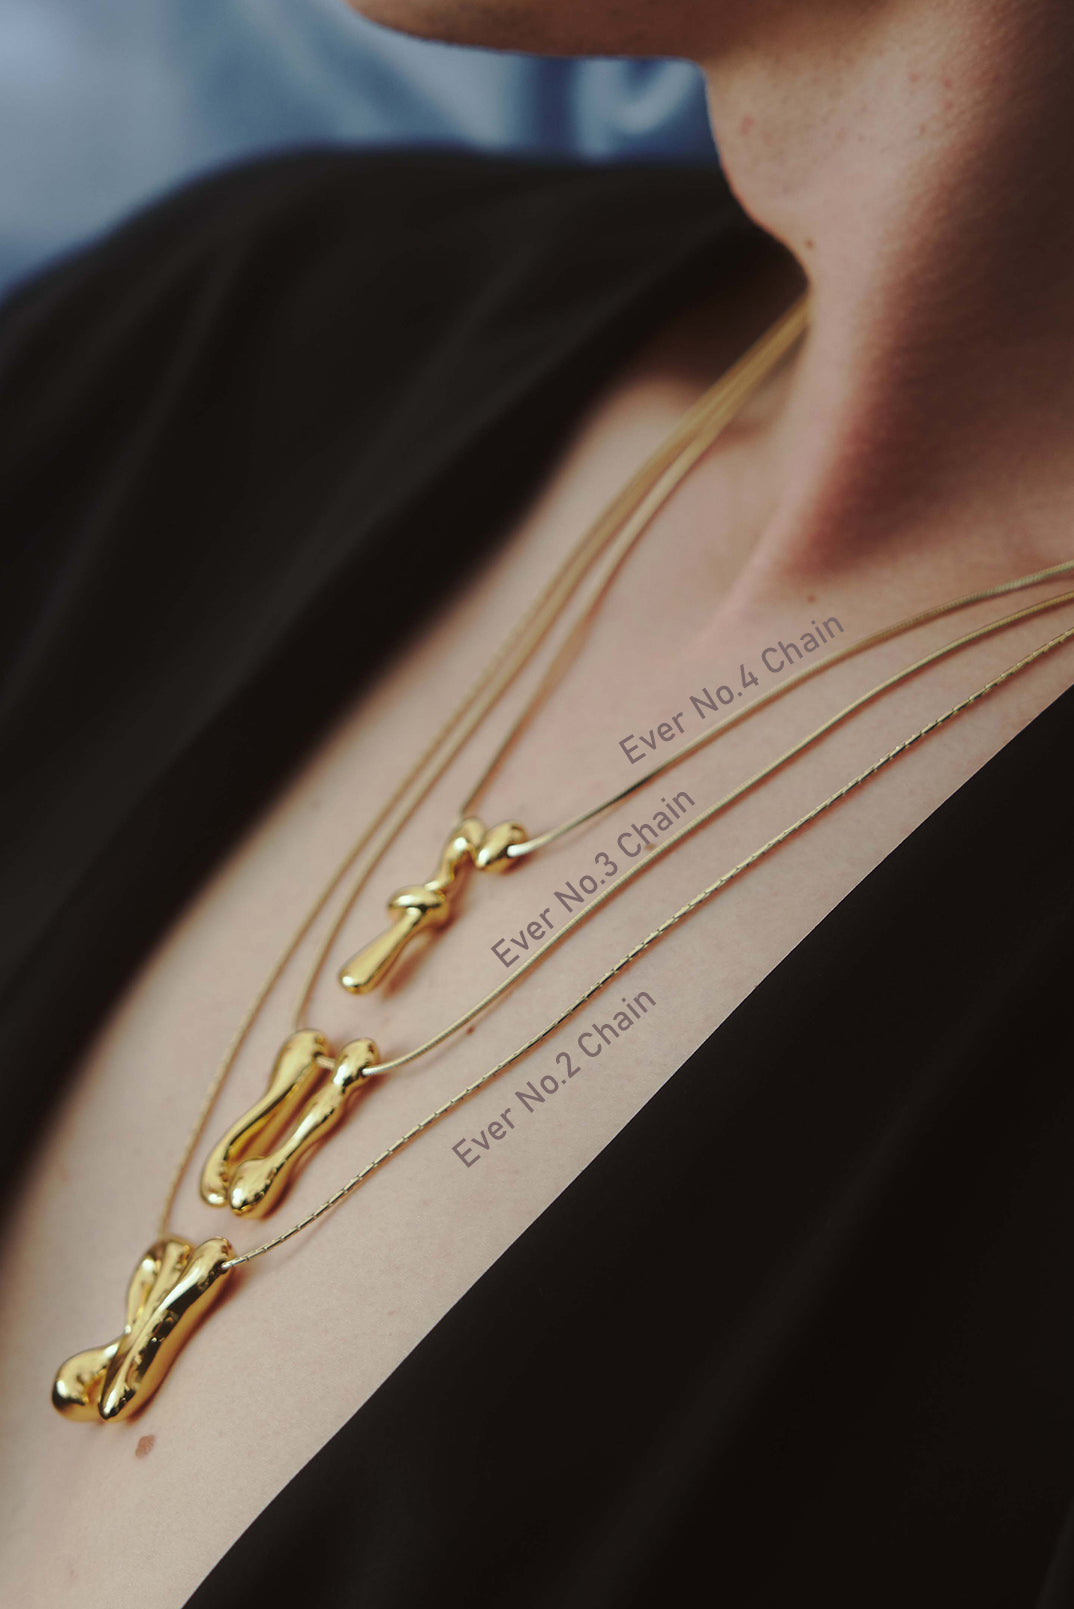 Ever No.3 Chain Necklace